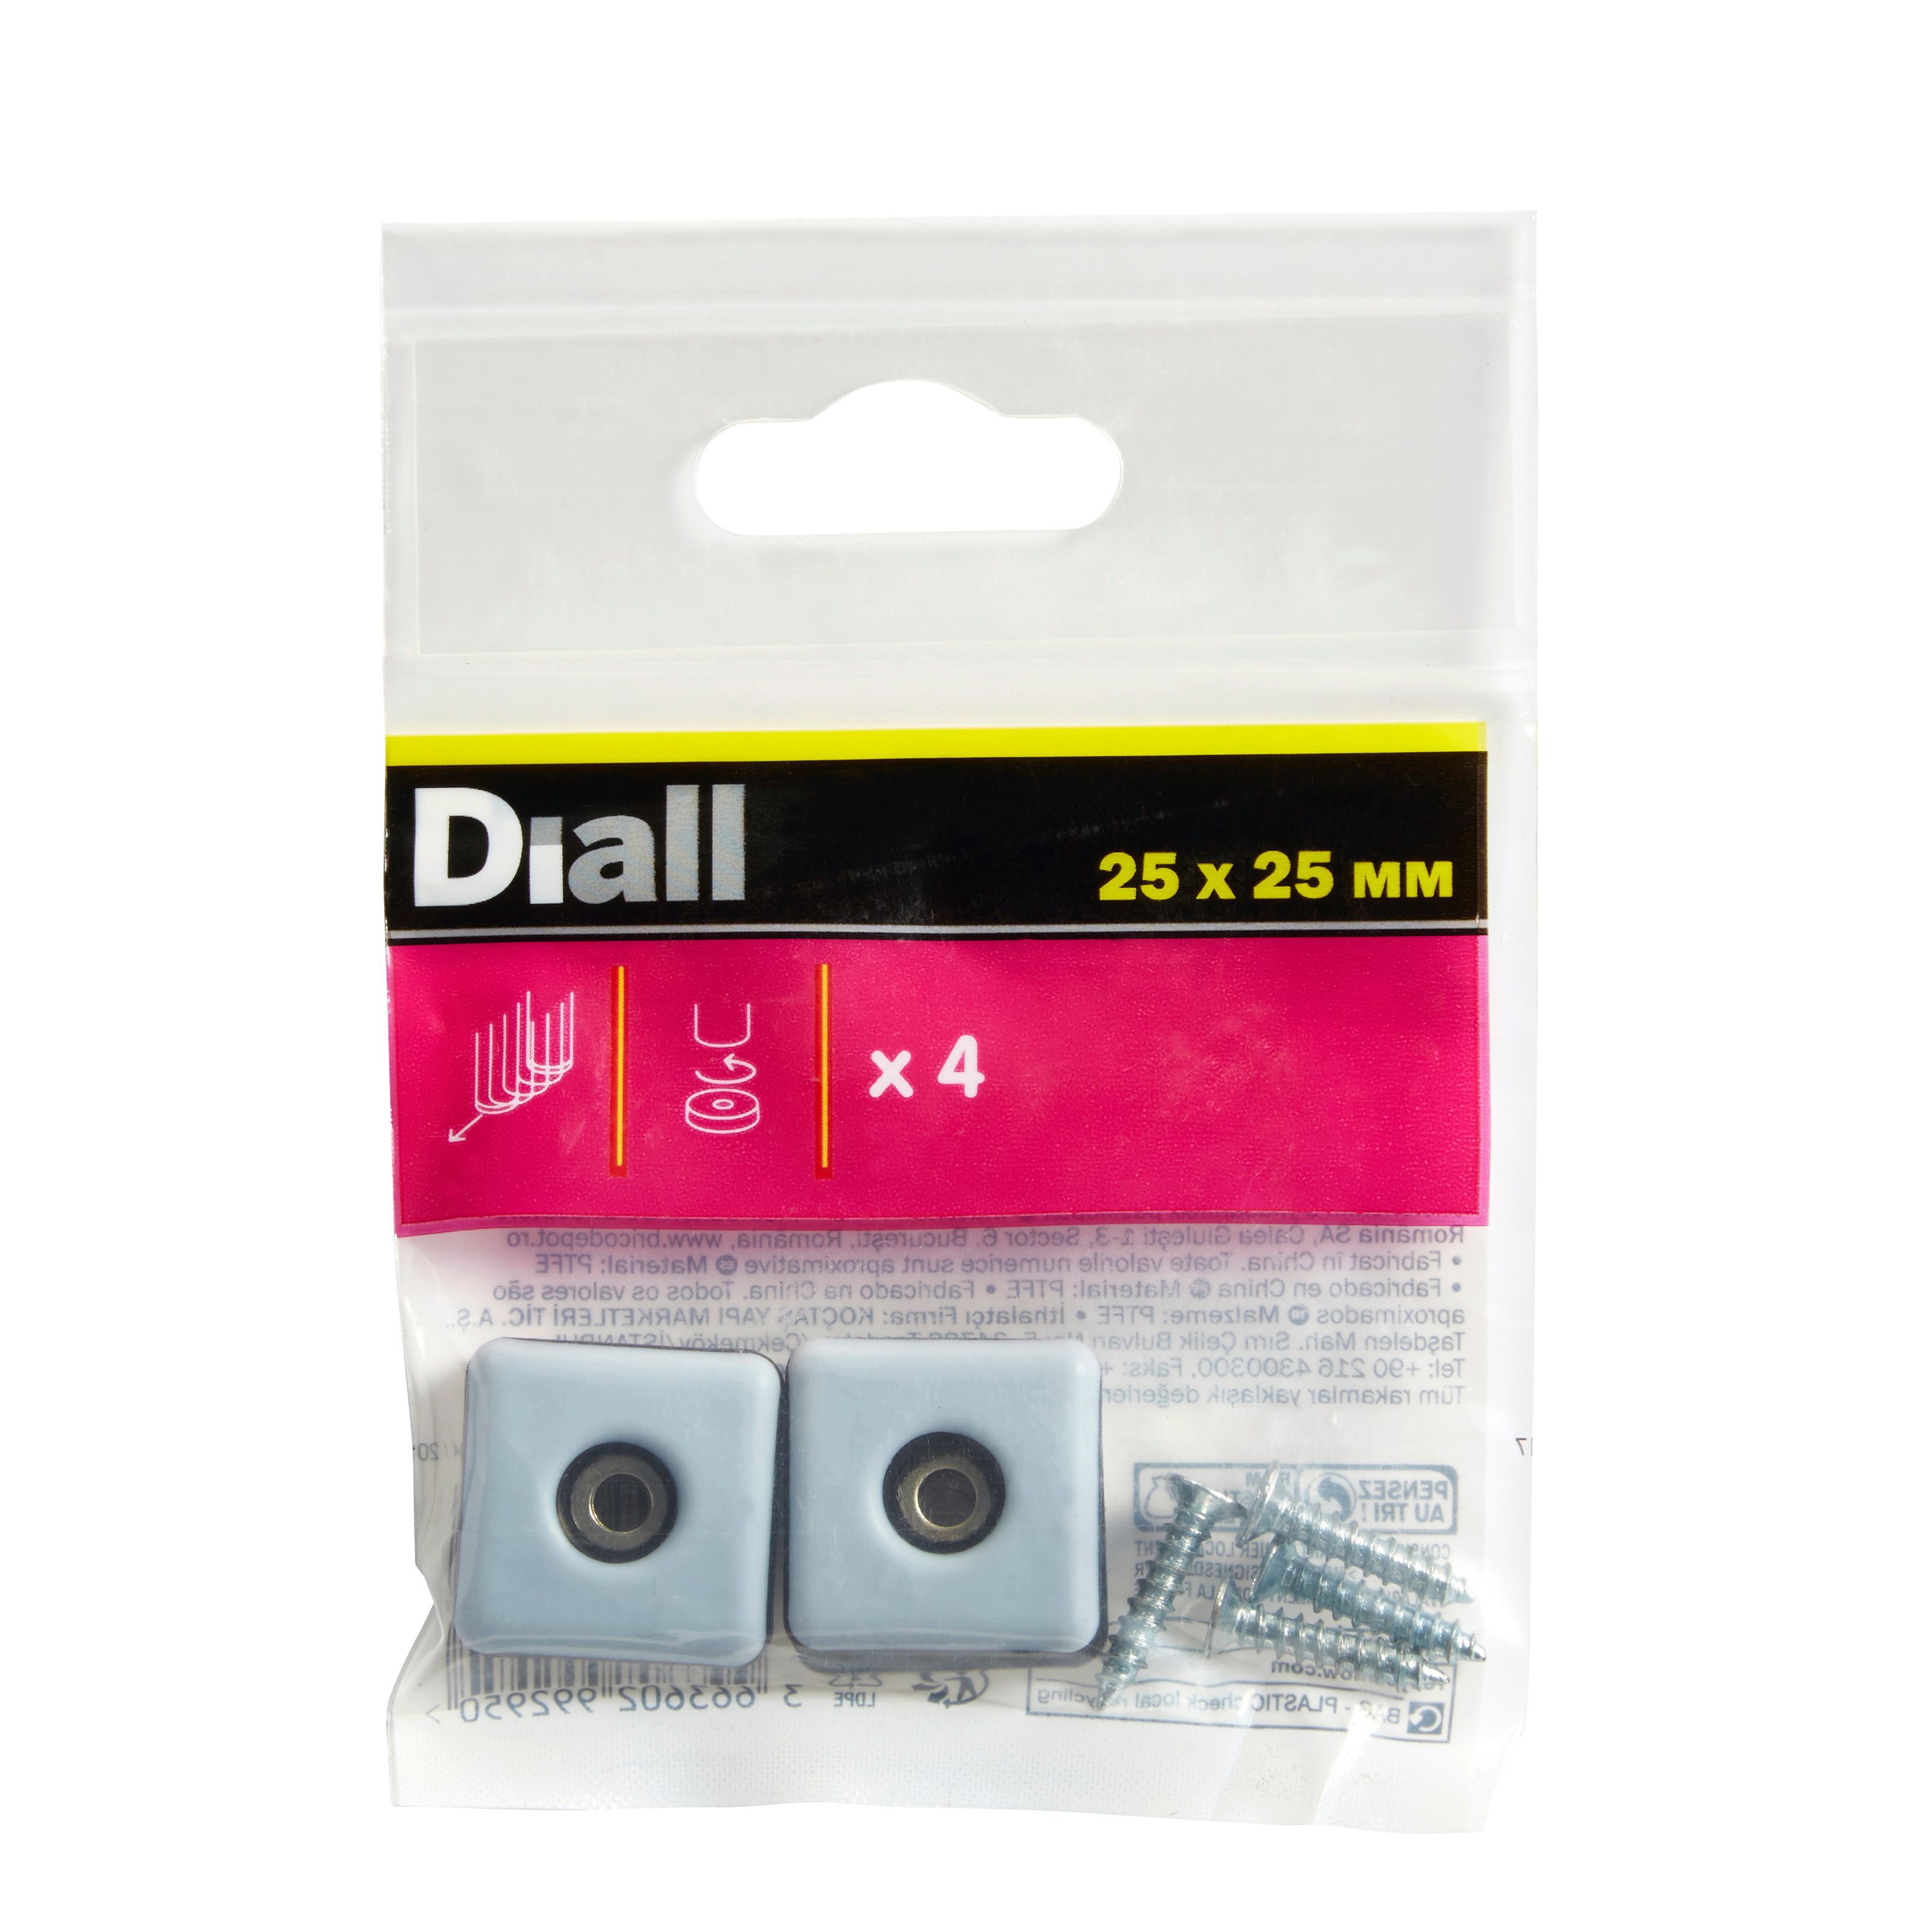 Diall Black & grey PTFE Nail-in glide, Pack of 4